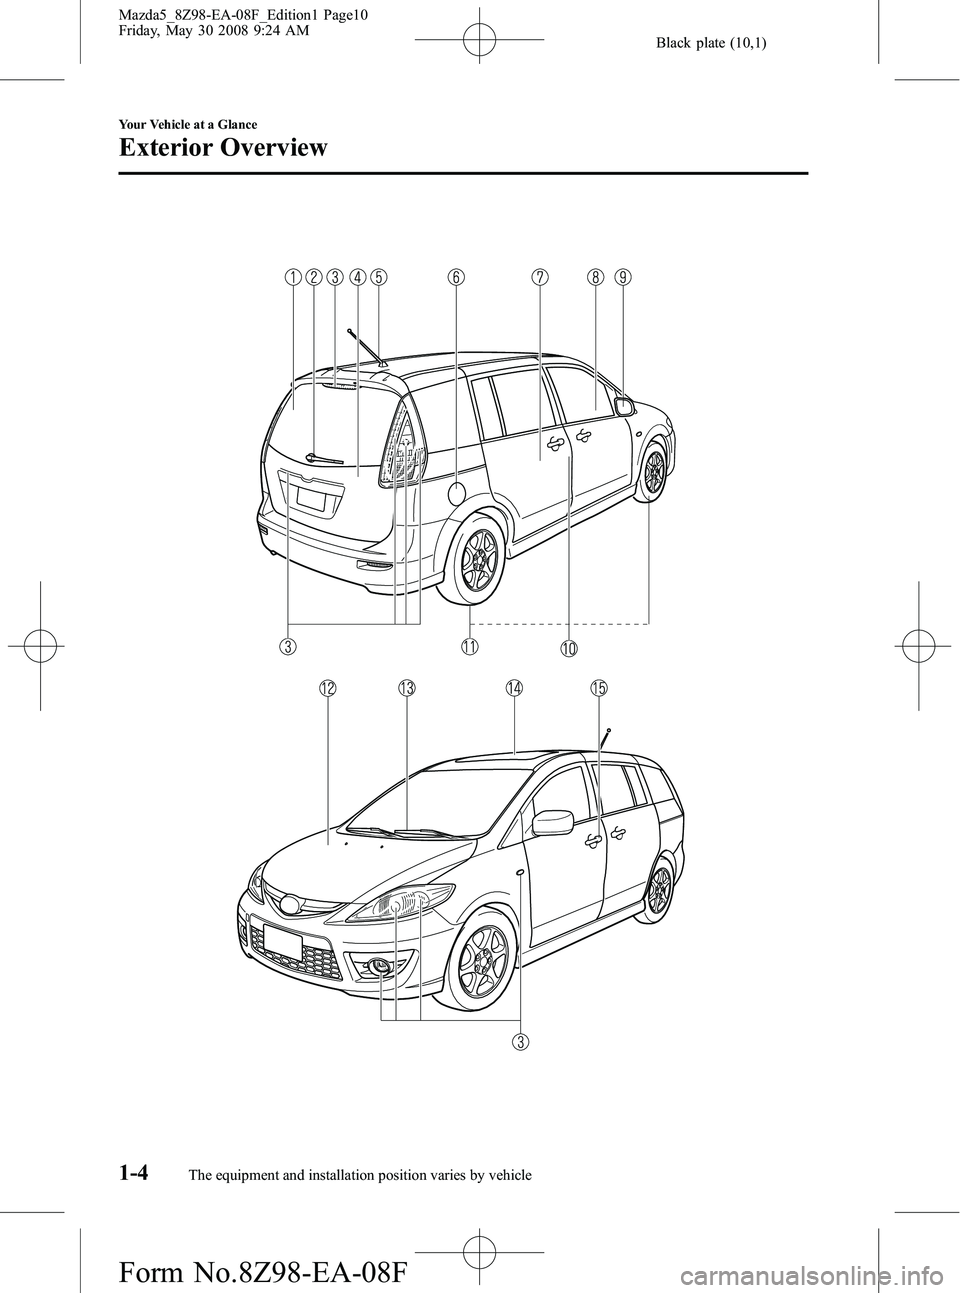 MAZDA MODEL 5 2009  Owners Manual Black plate (10,1)
1-4
Your Vehicle at a Glance
The equipment and installation position varies by vehicle
Exterior Overview
Mazda5_8Z98-EA-08F_Edition1 Page10
Friday, May 30 2008 9:24 AM
Form No.8Z98-